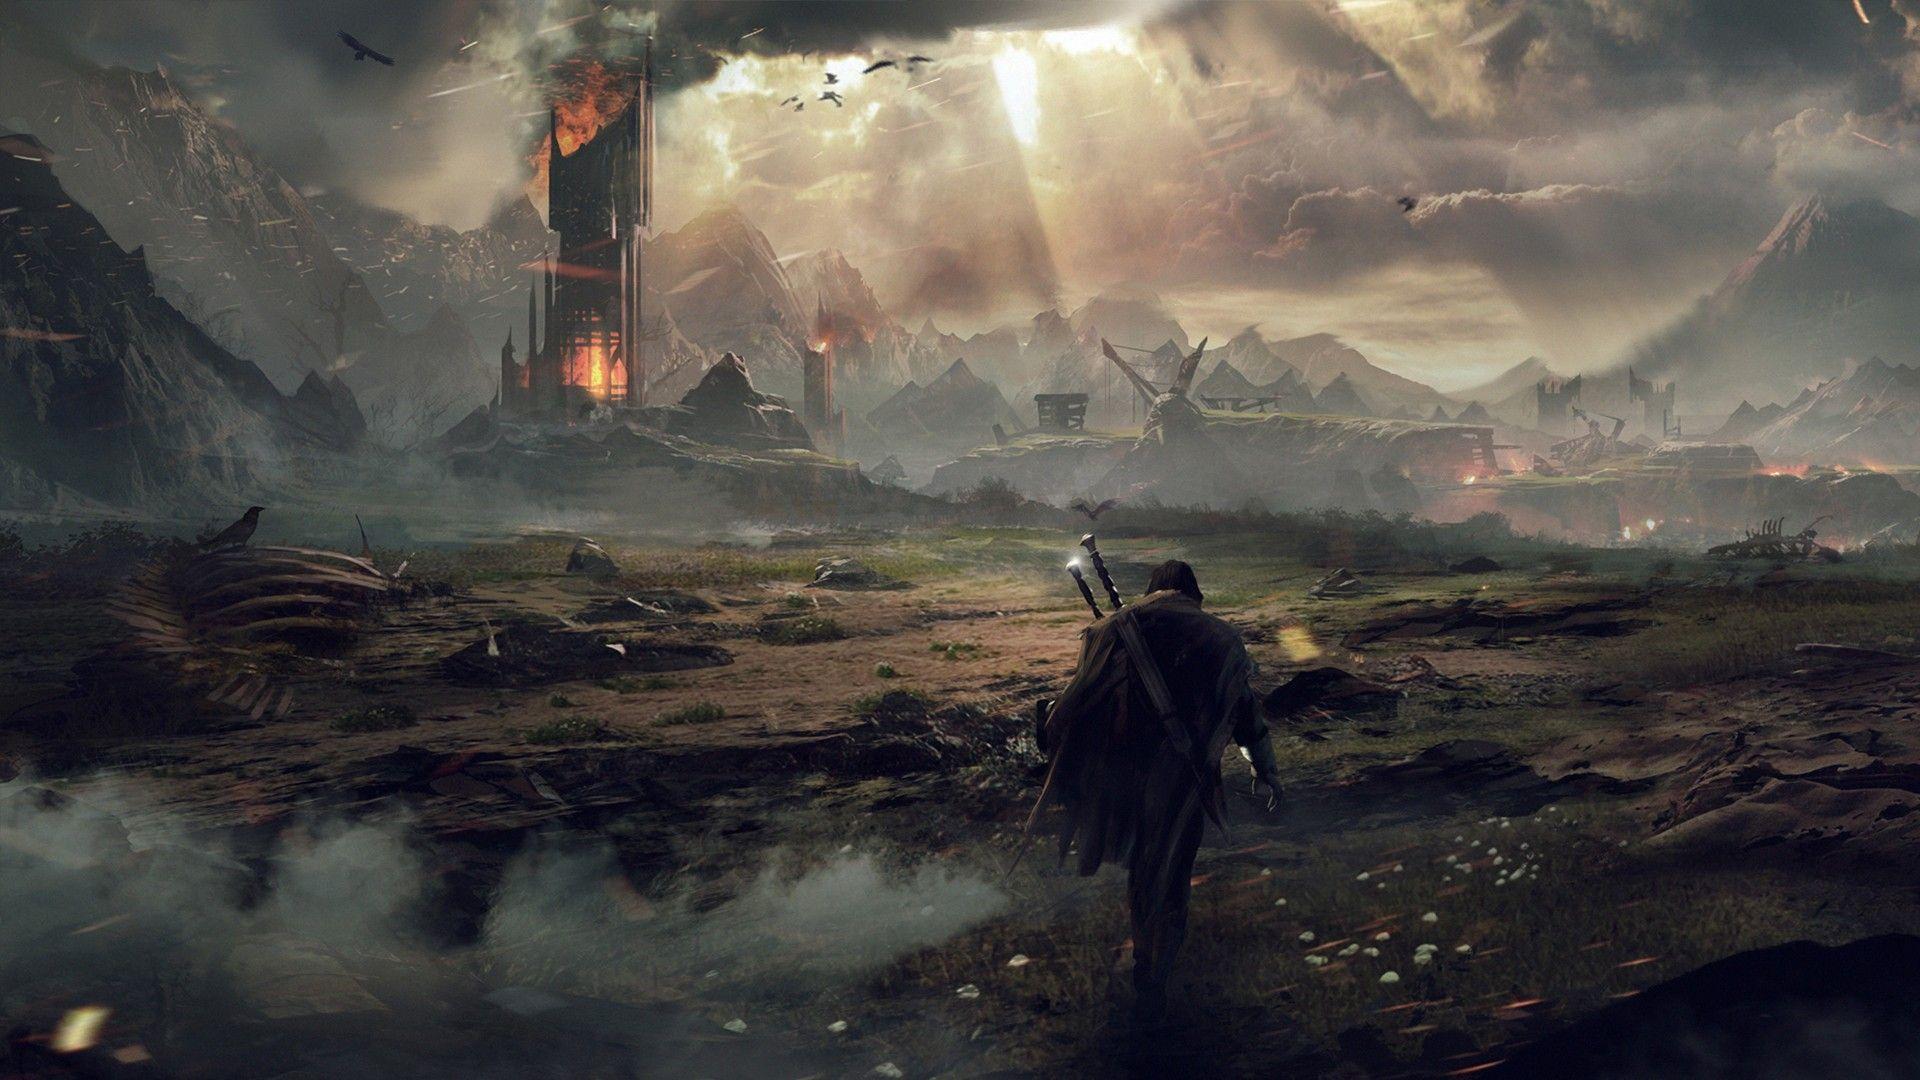 Middle Earth Shadow Of Mordor Wallpaper. TanukinoSippo